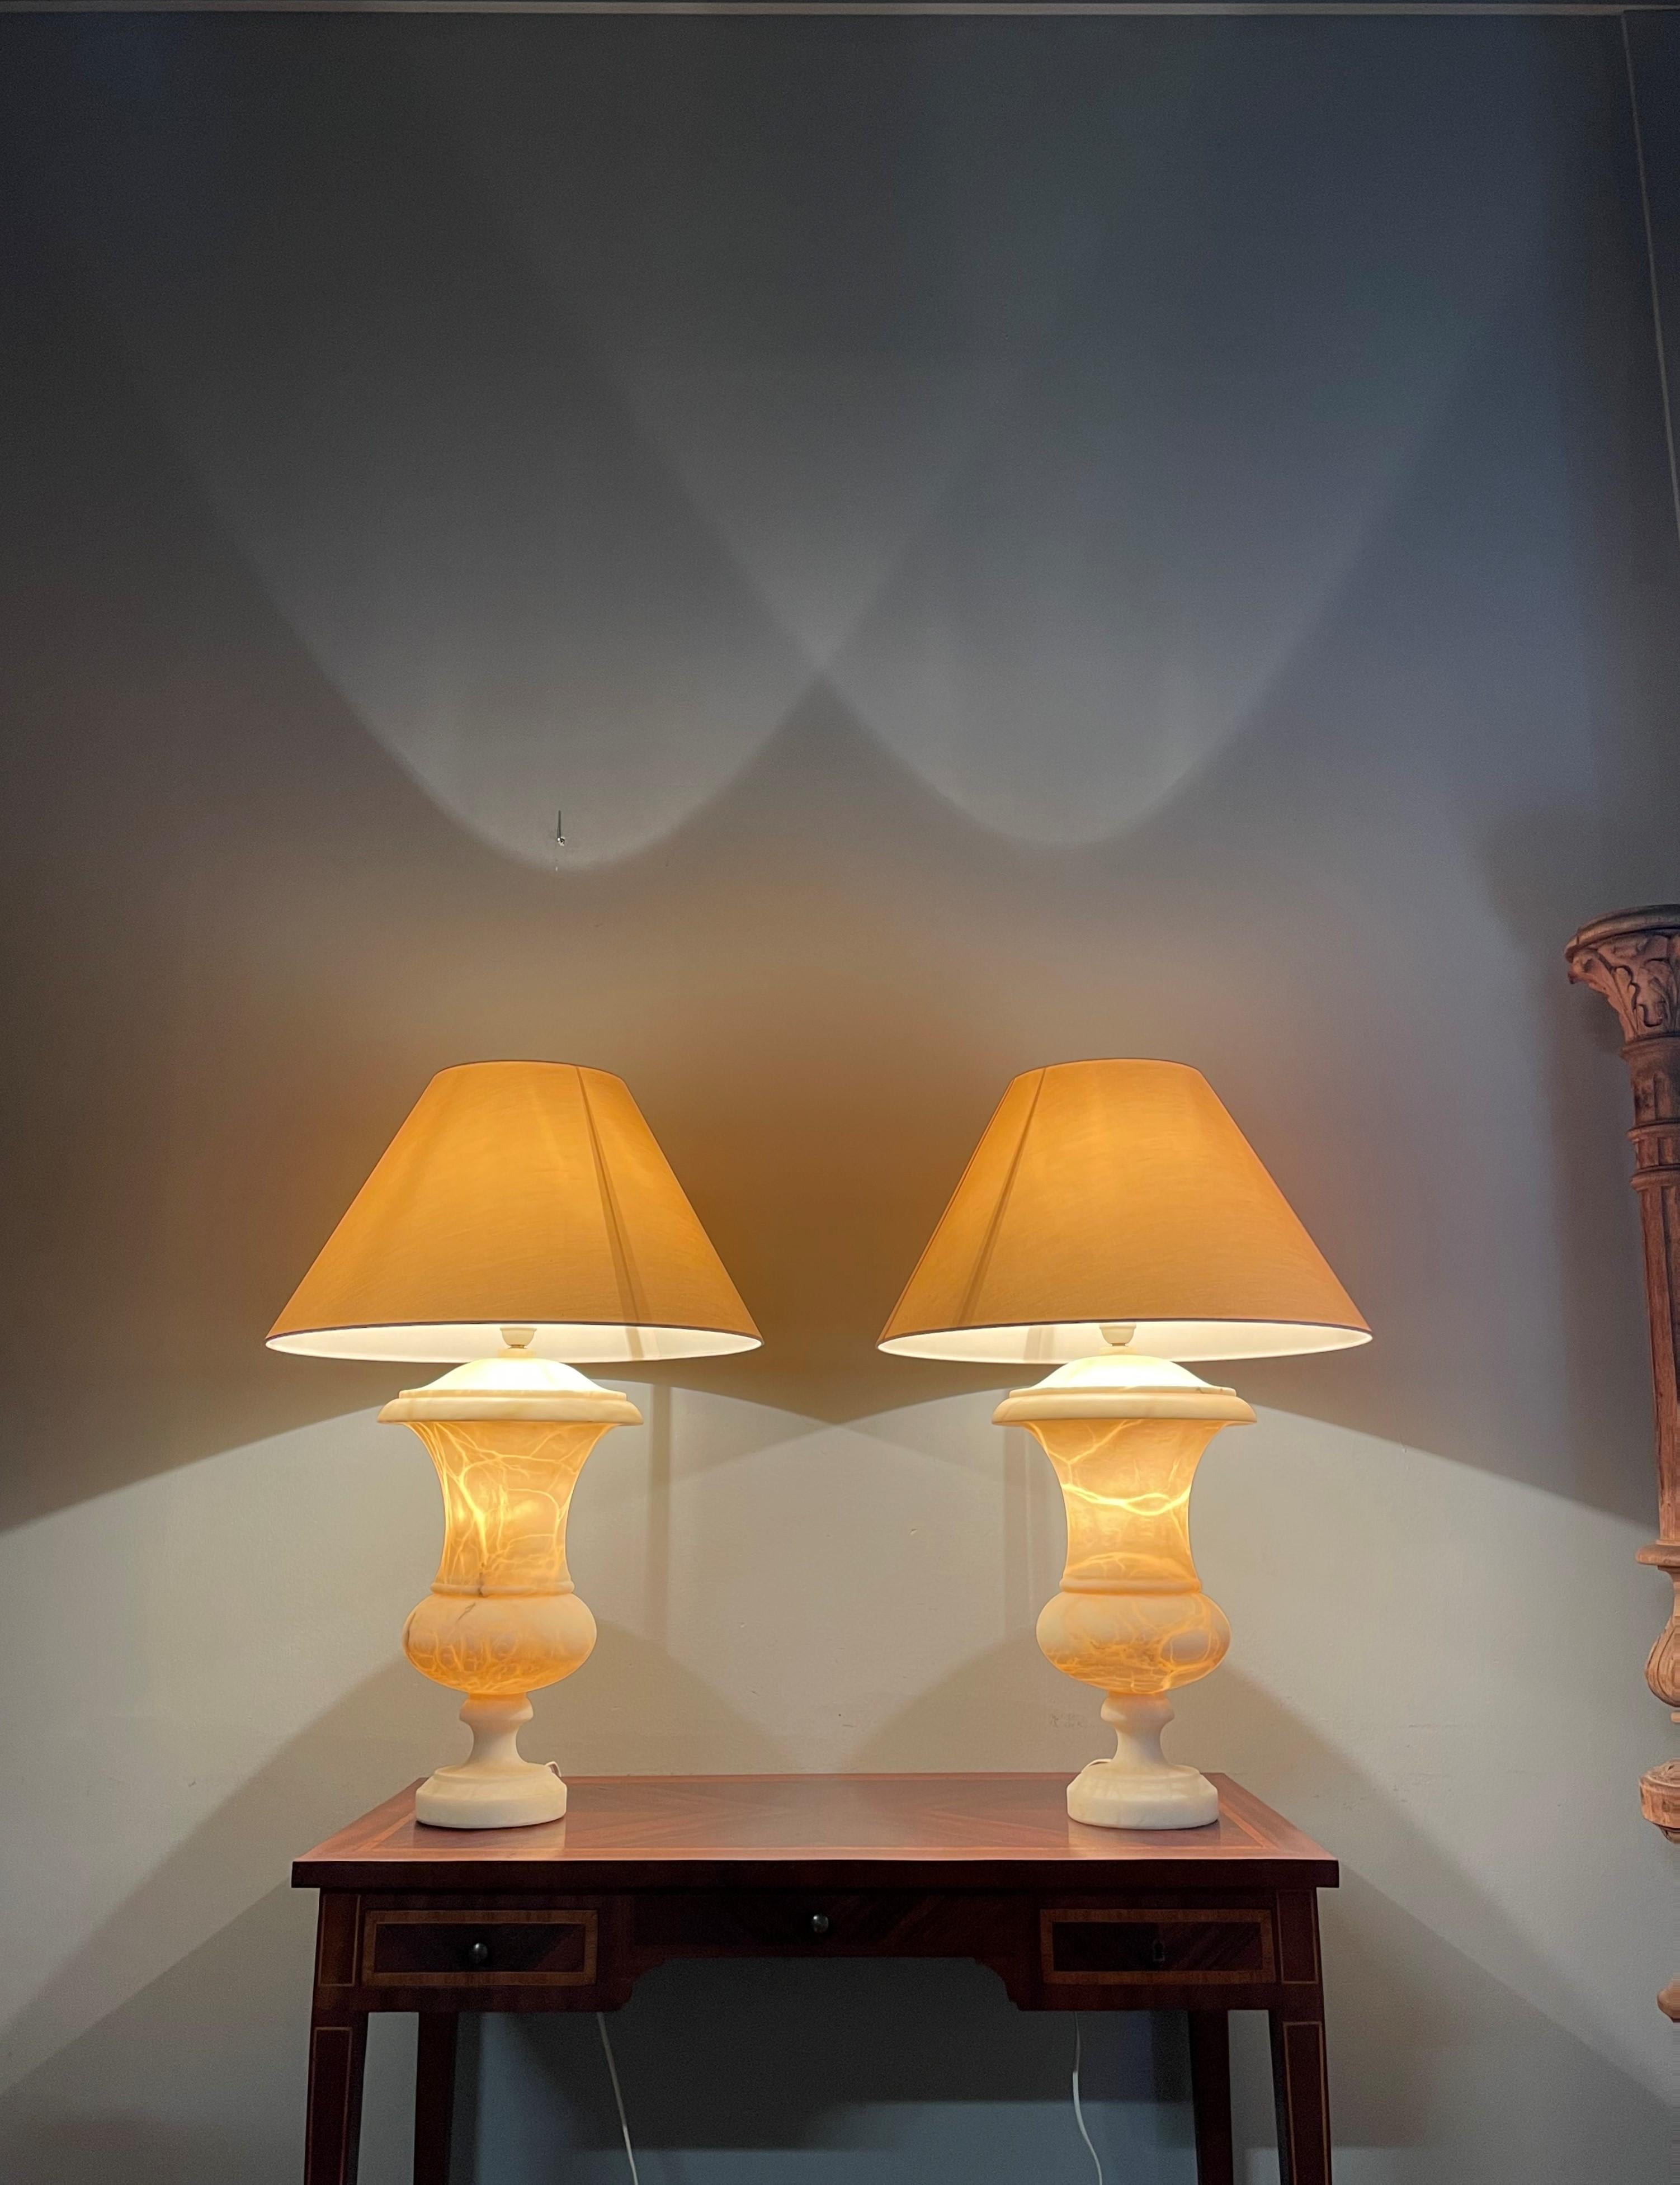 Impressive design, largest size and beautiful atmosphere creating table lights.

This rare and very impressive pair of handcrafted, mineral stone table lamps is another one of our recent great finds. With their large size and timeless design these